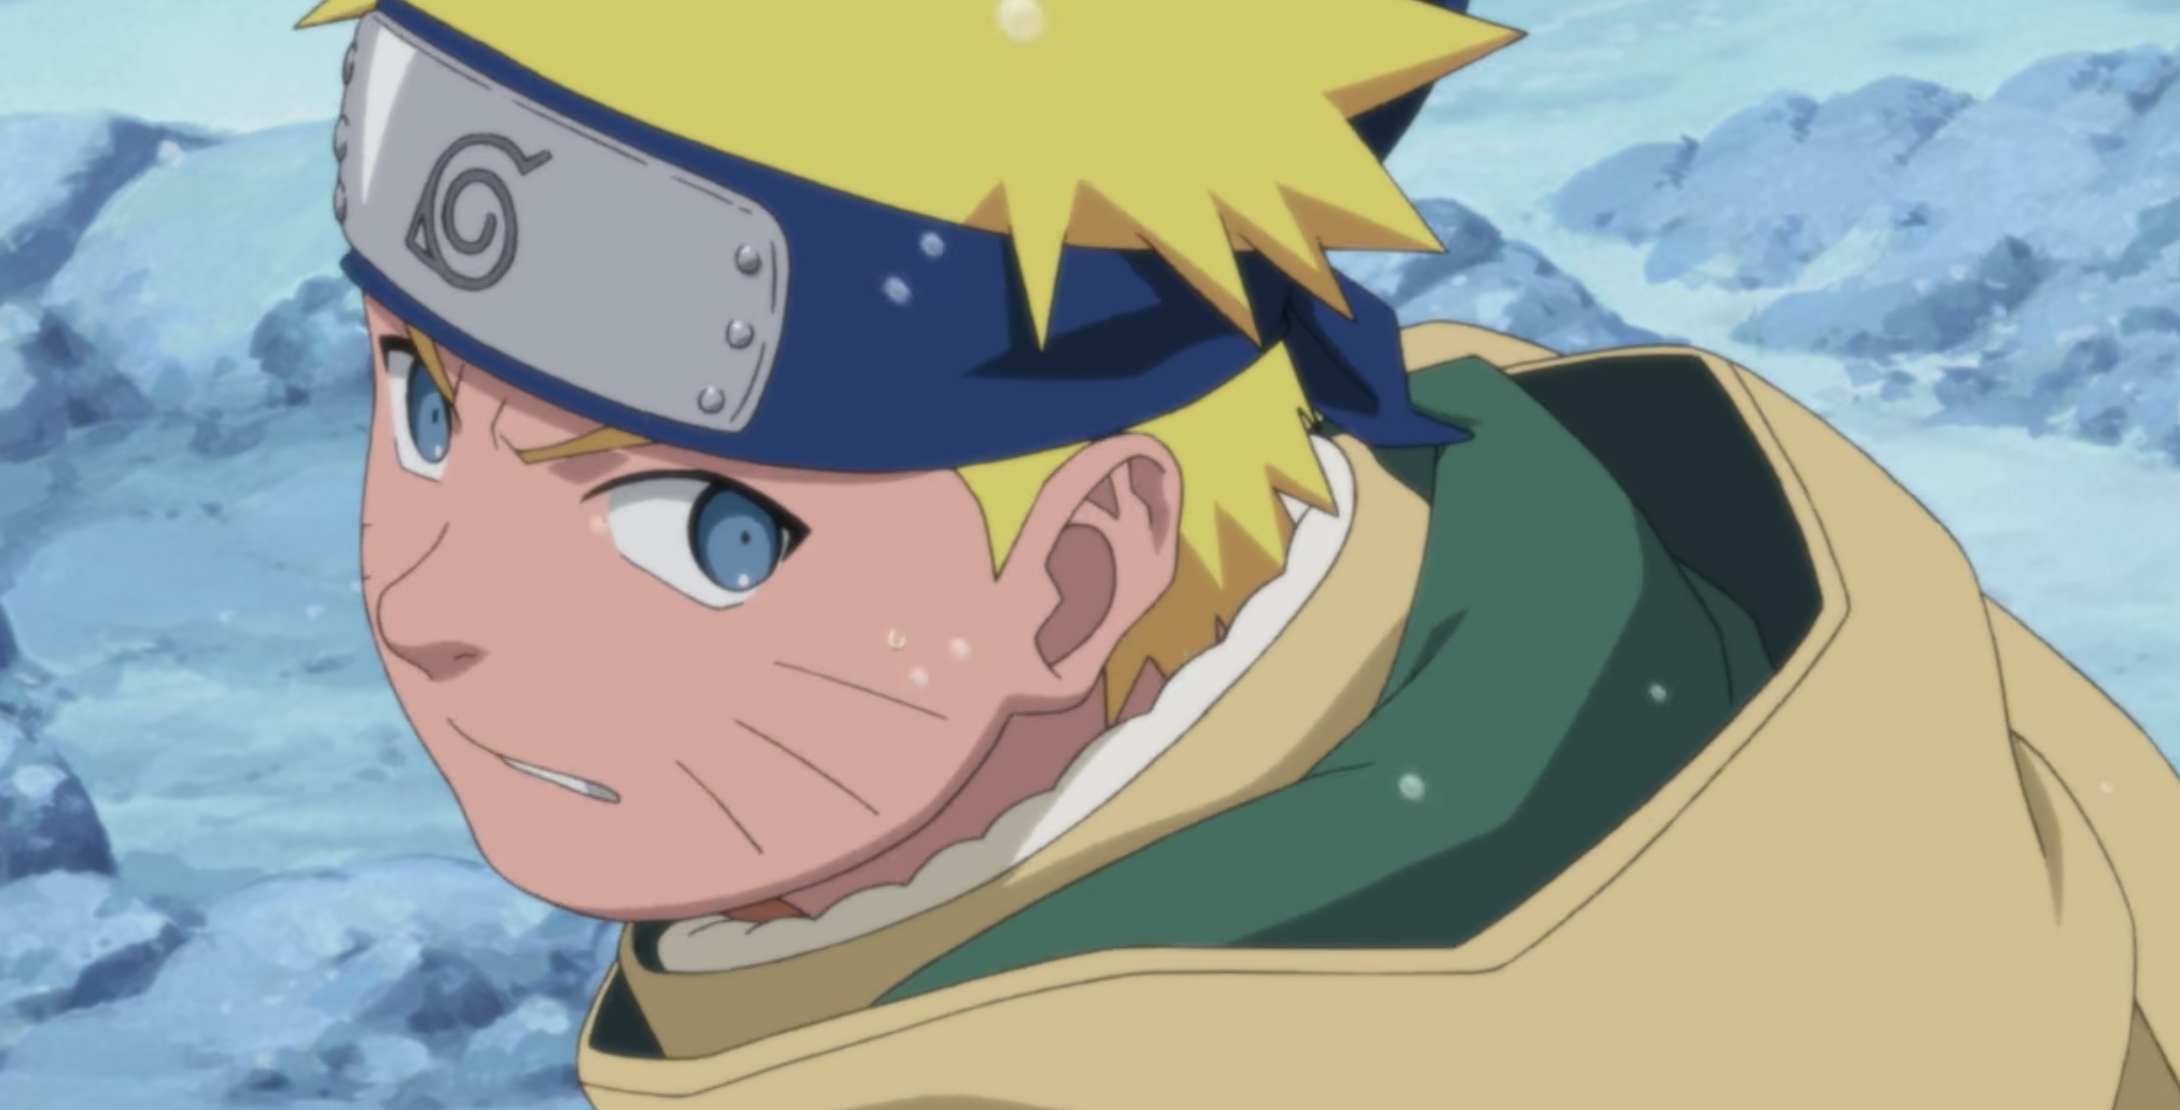 The English Voice Actor for Naruto May Not Be Who You’d Expect